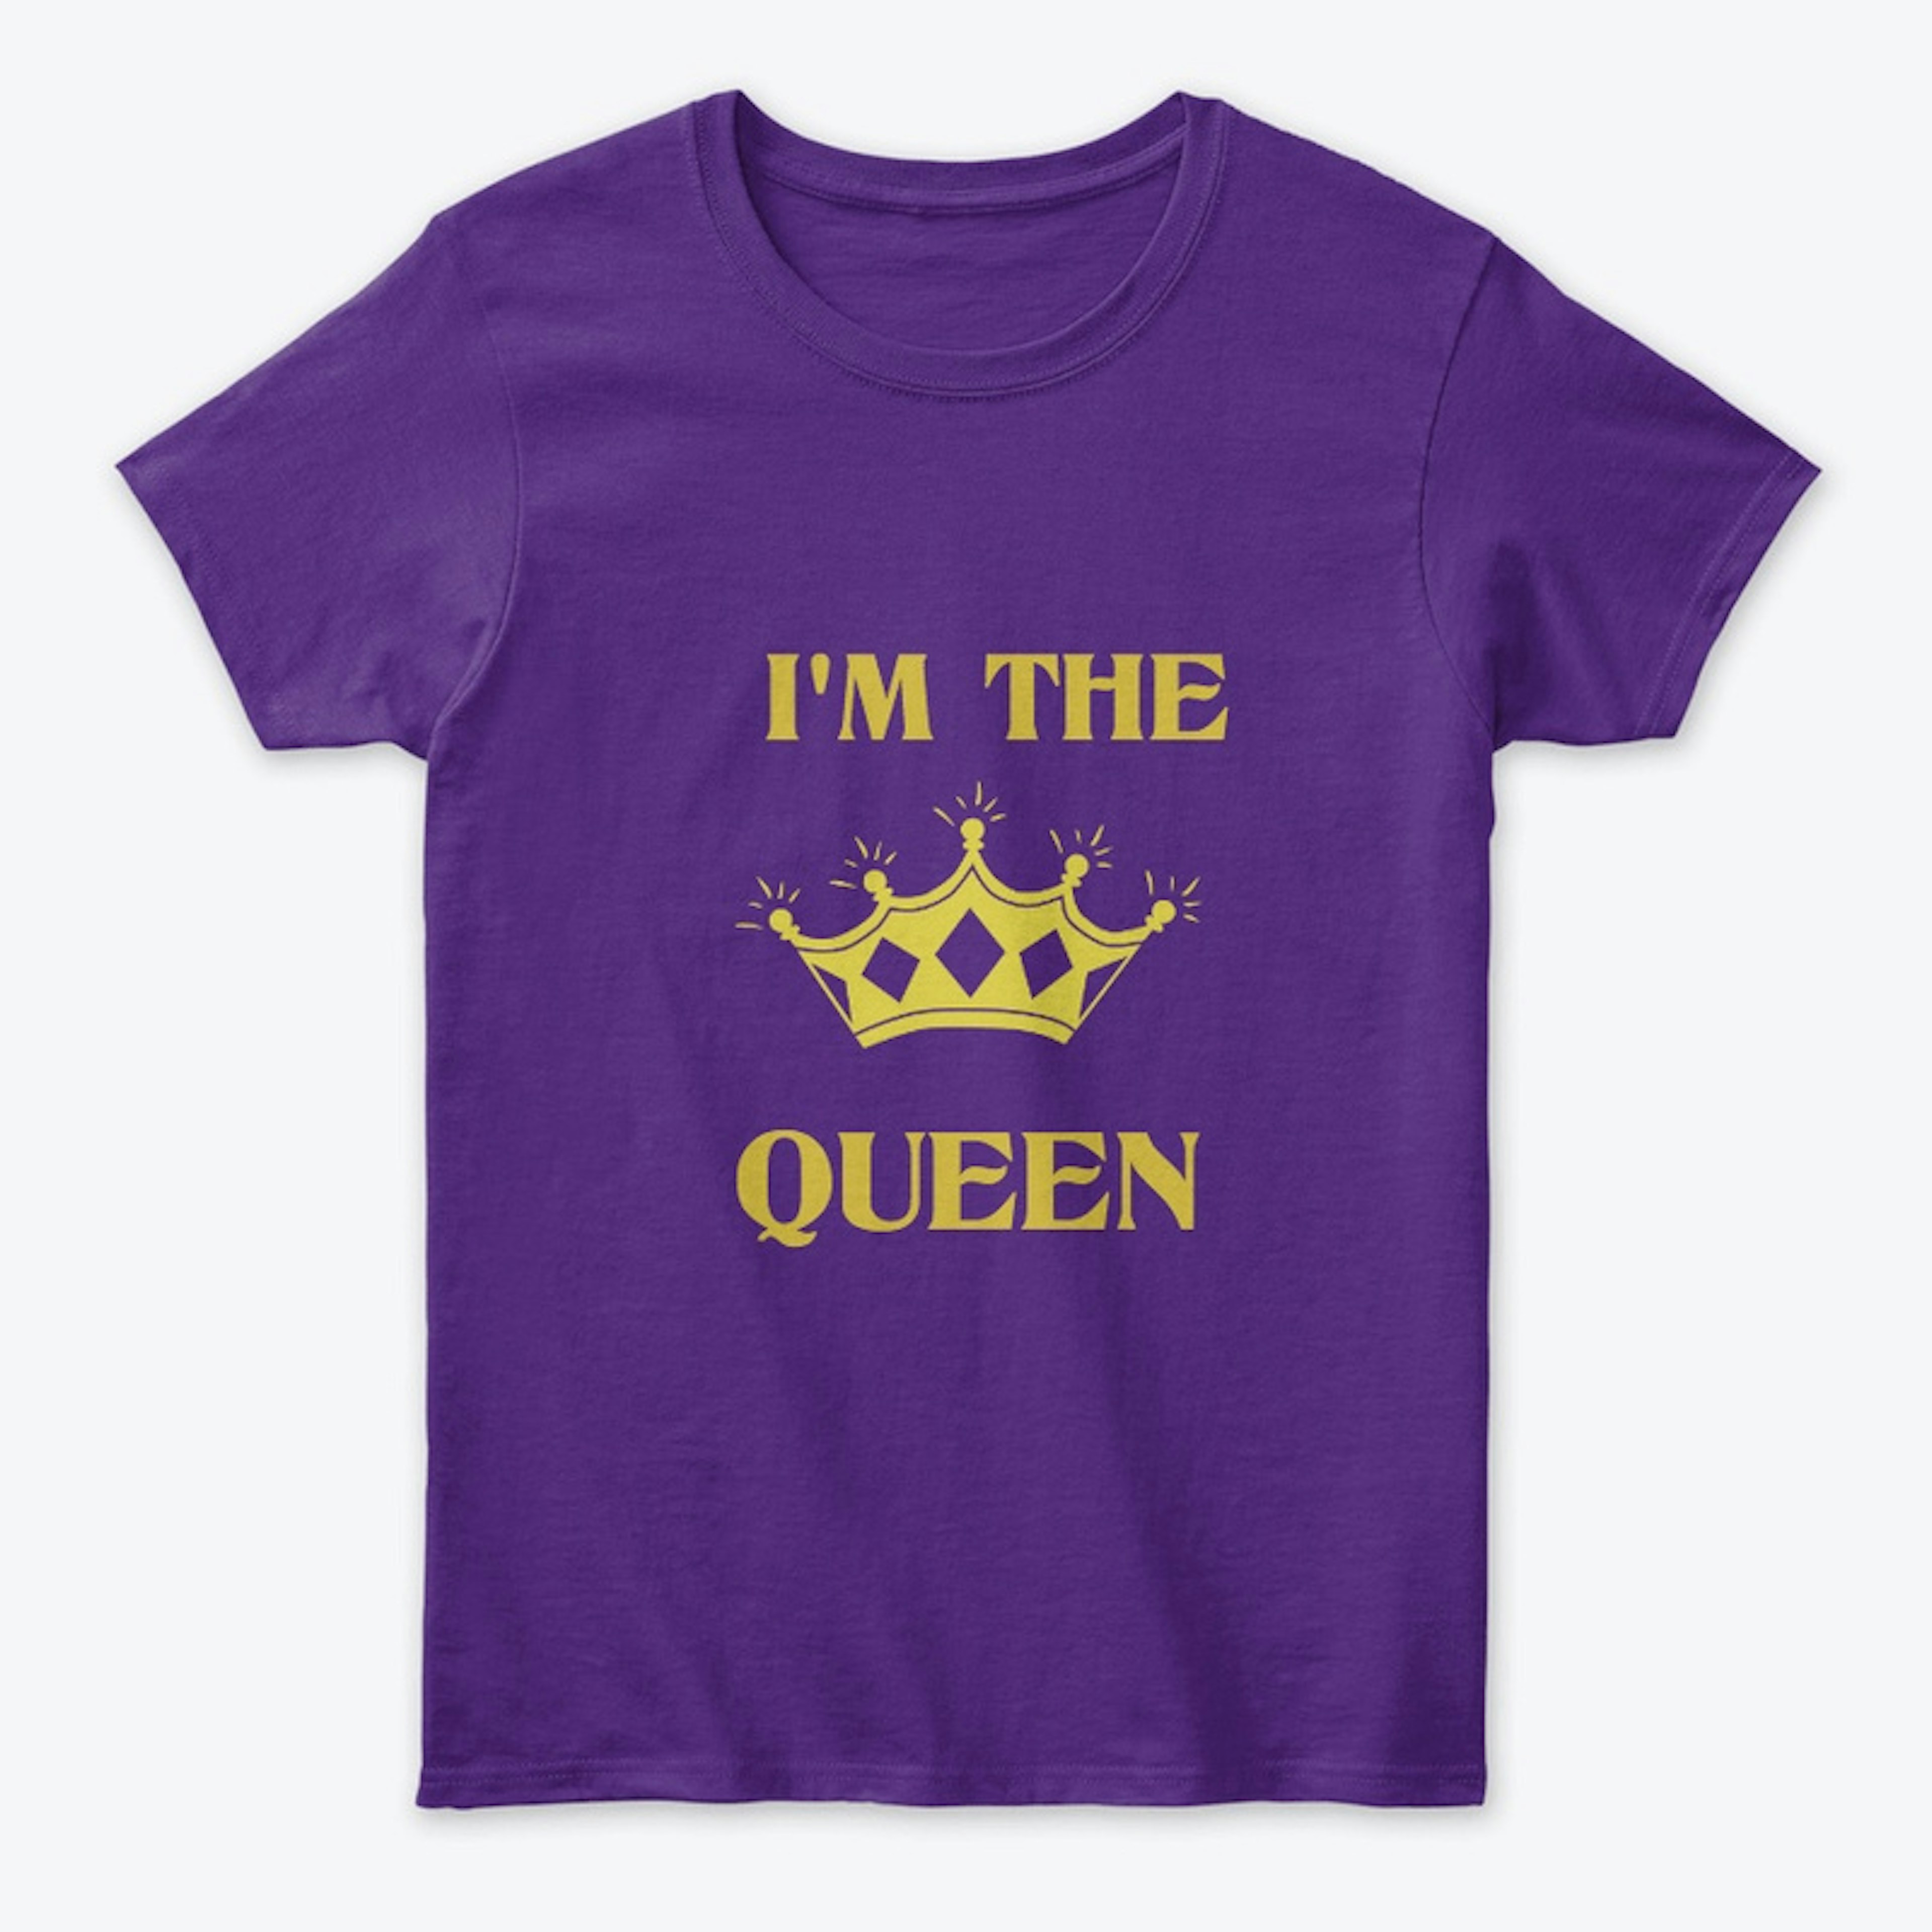 I'm The Queen Tee g